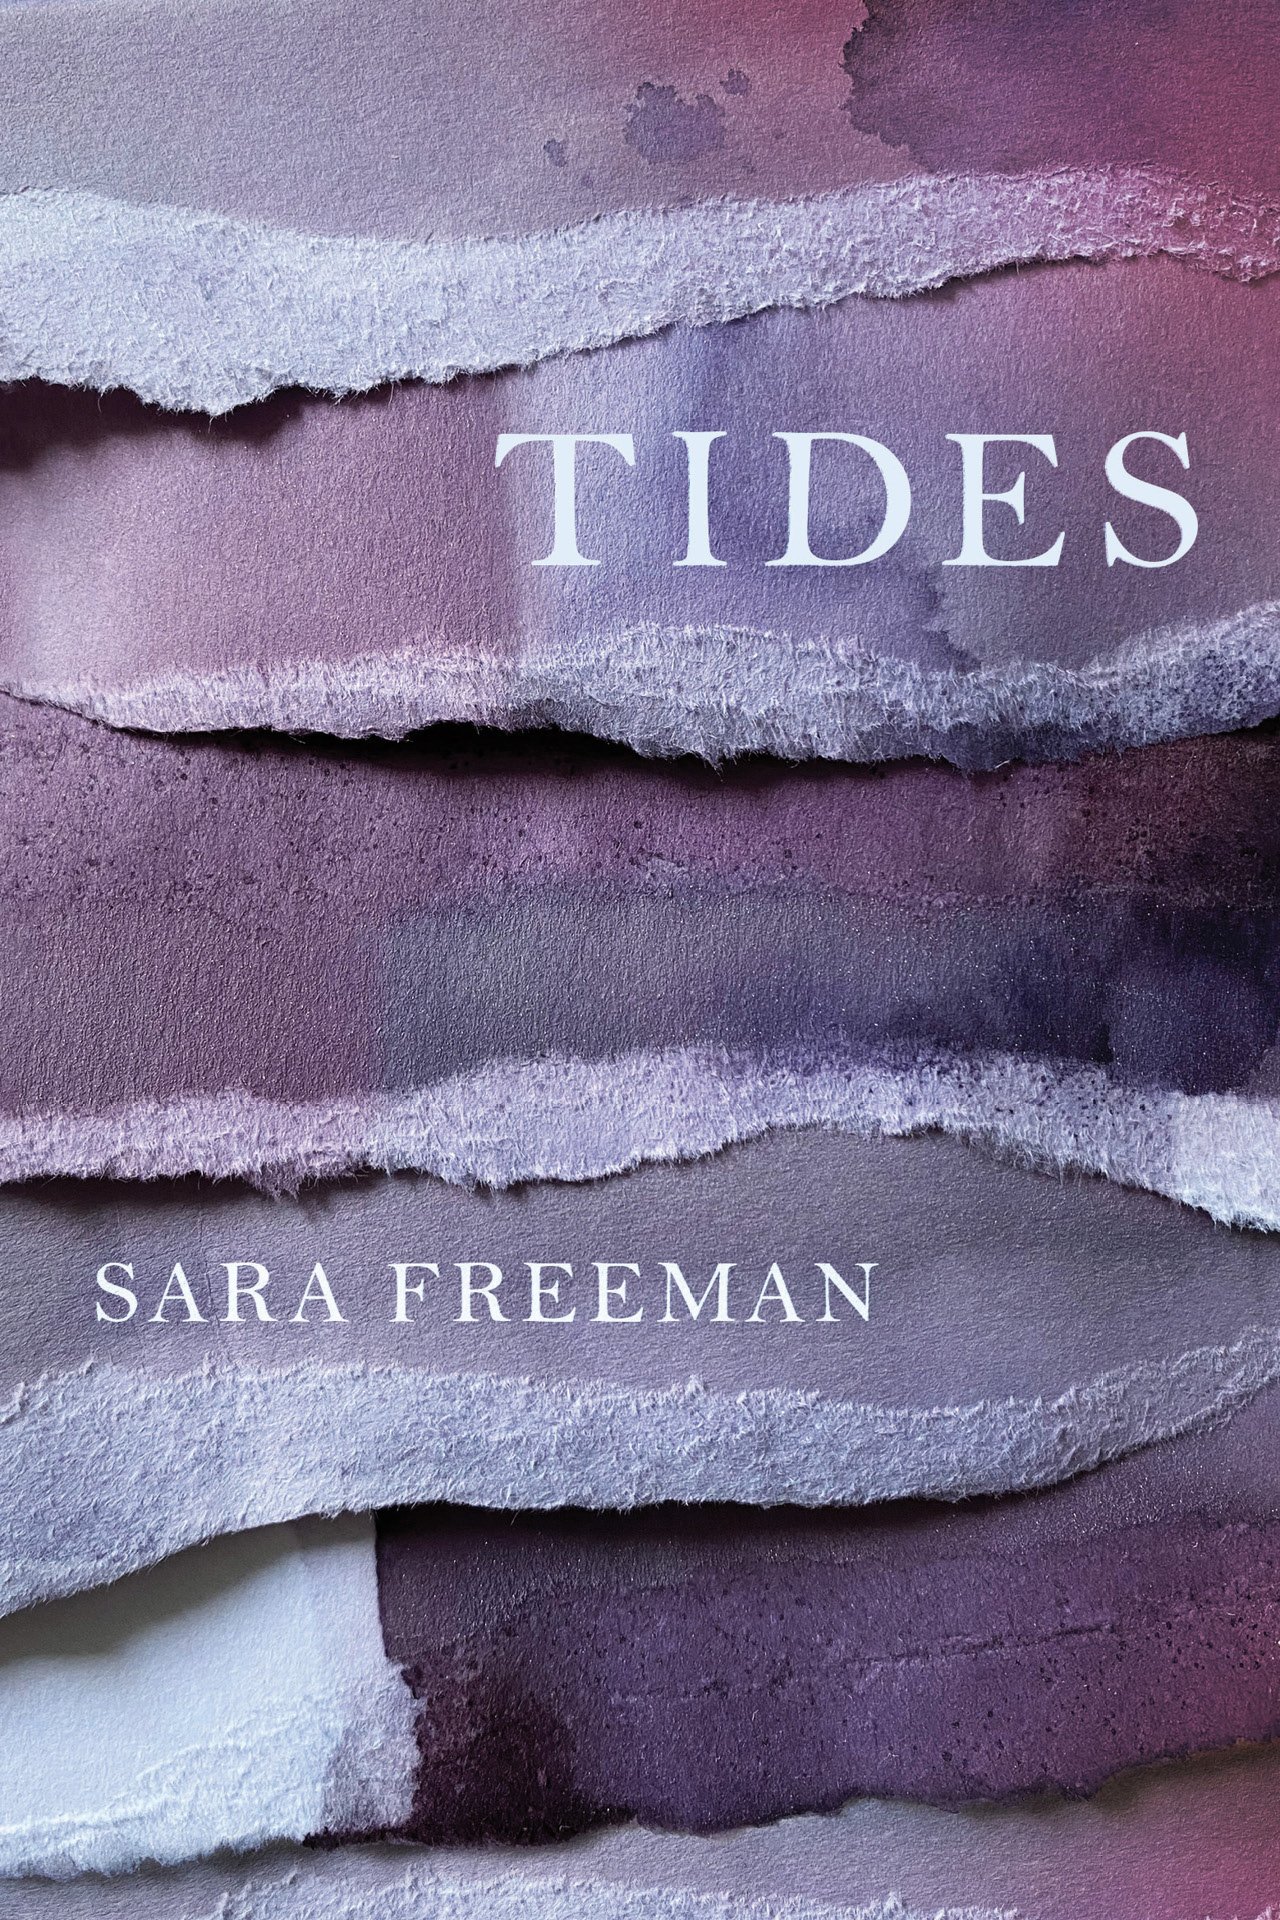 The cover of Tides by Sara Freeman